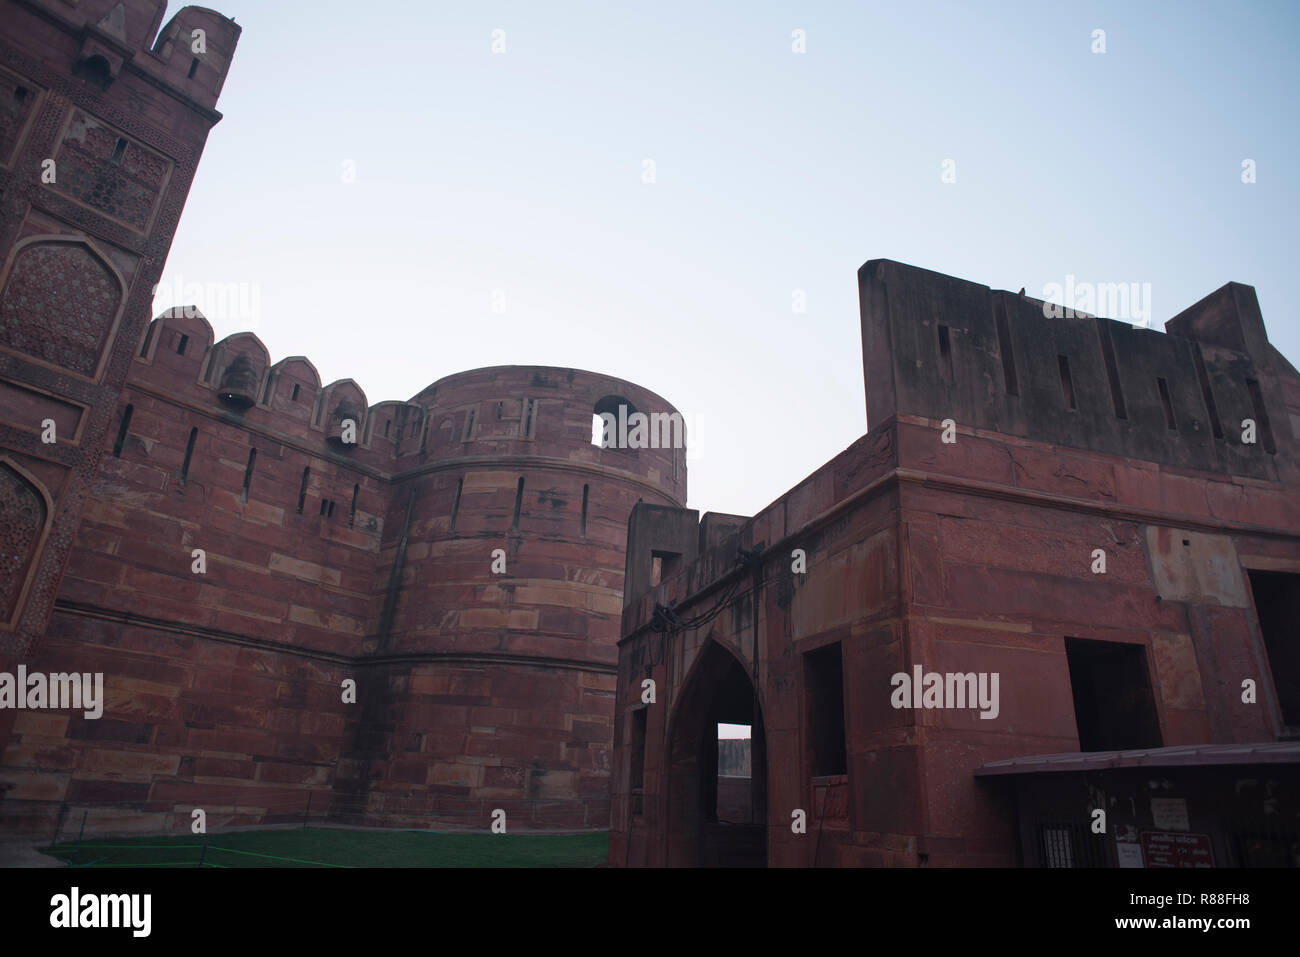 Splendor of mughal architecture of Agra Fort also called as the red fort with high thick strong walls made of red stones with arcs doors and windows Stock Photo